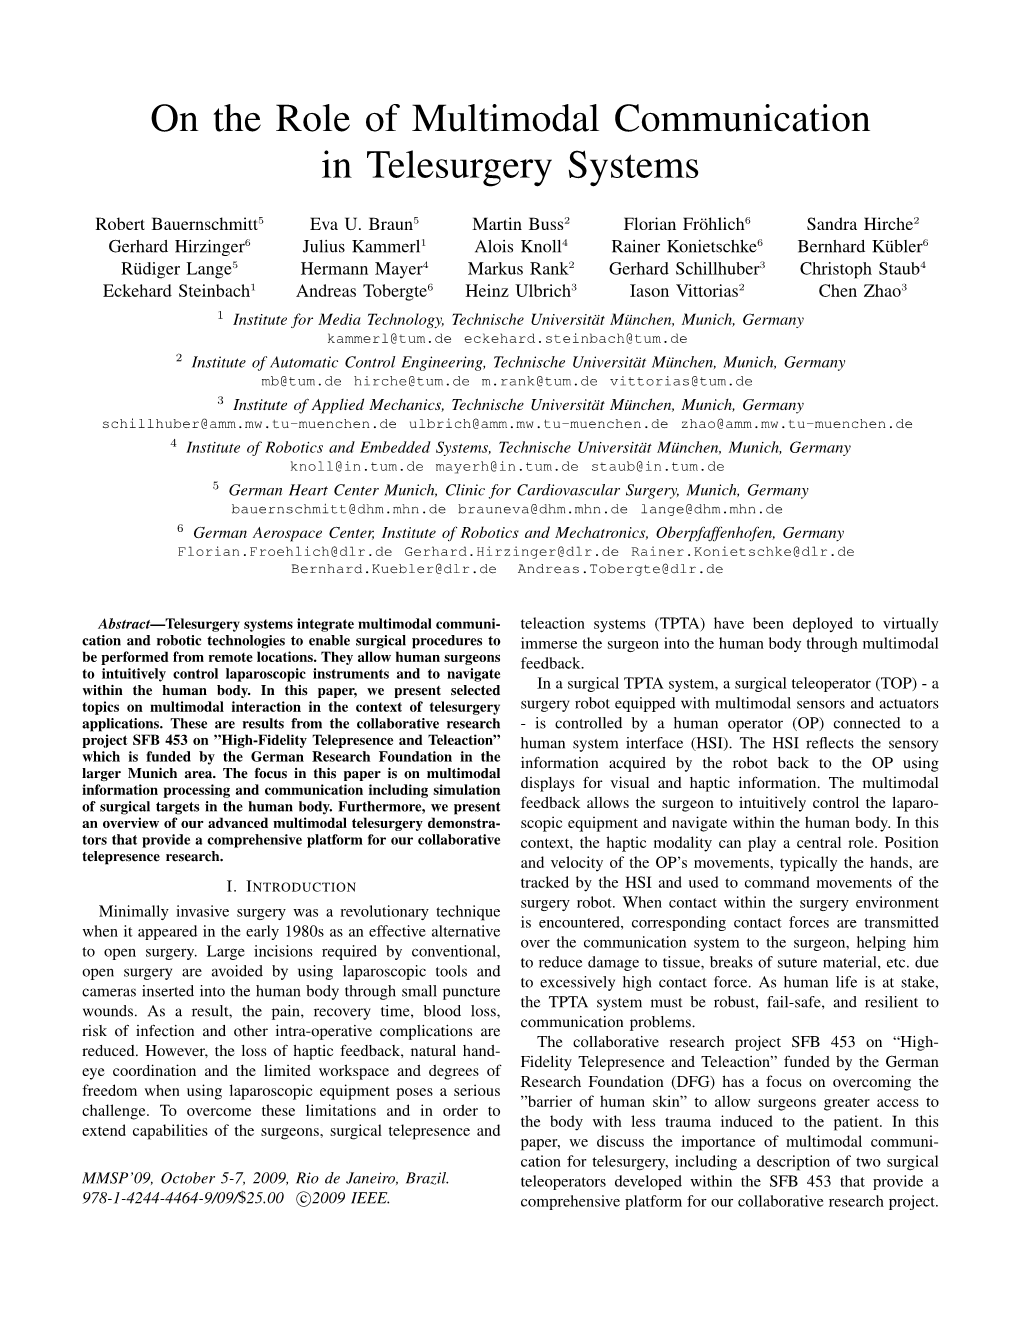 On the Role of Multimodal Communication in Telesurgery Systems